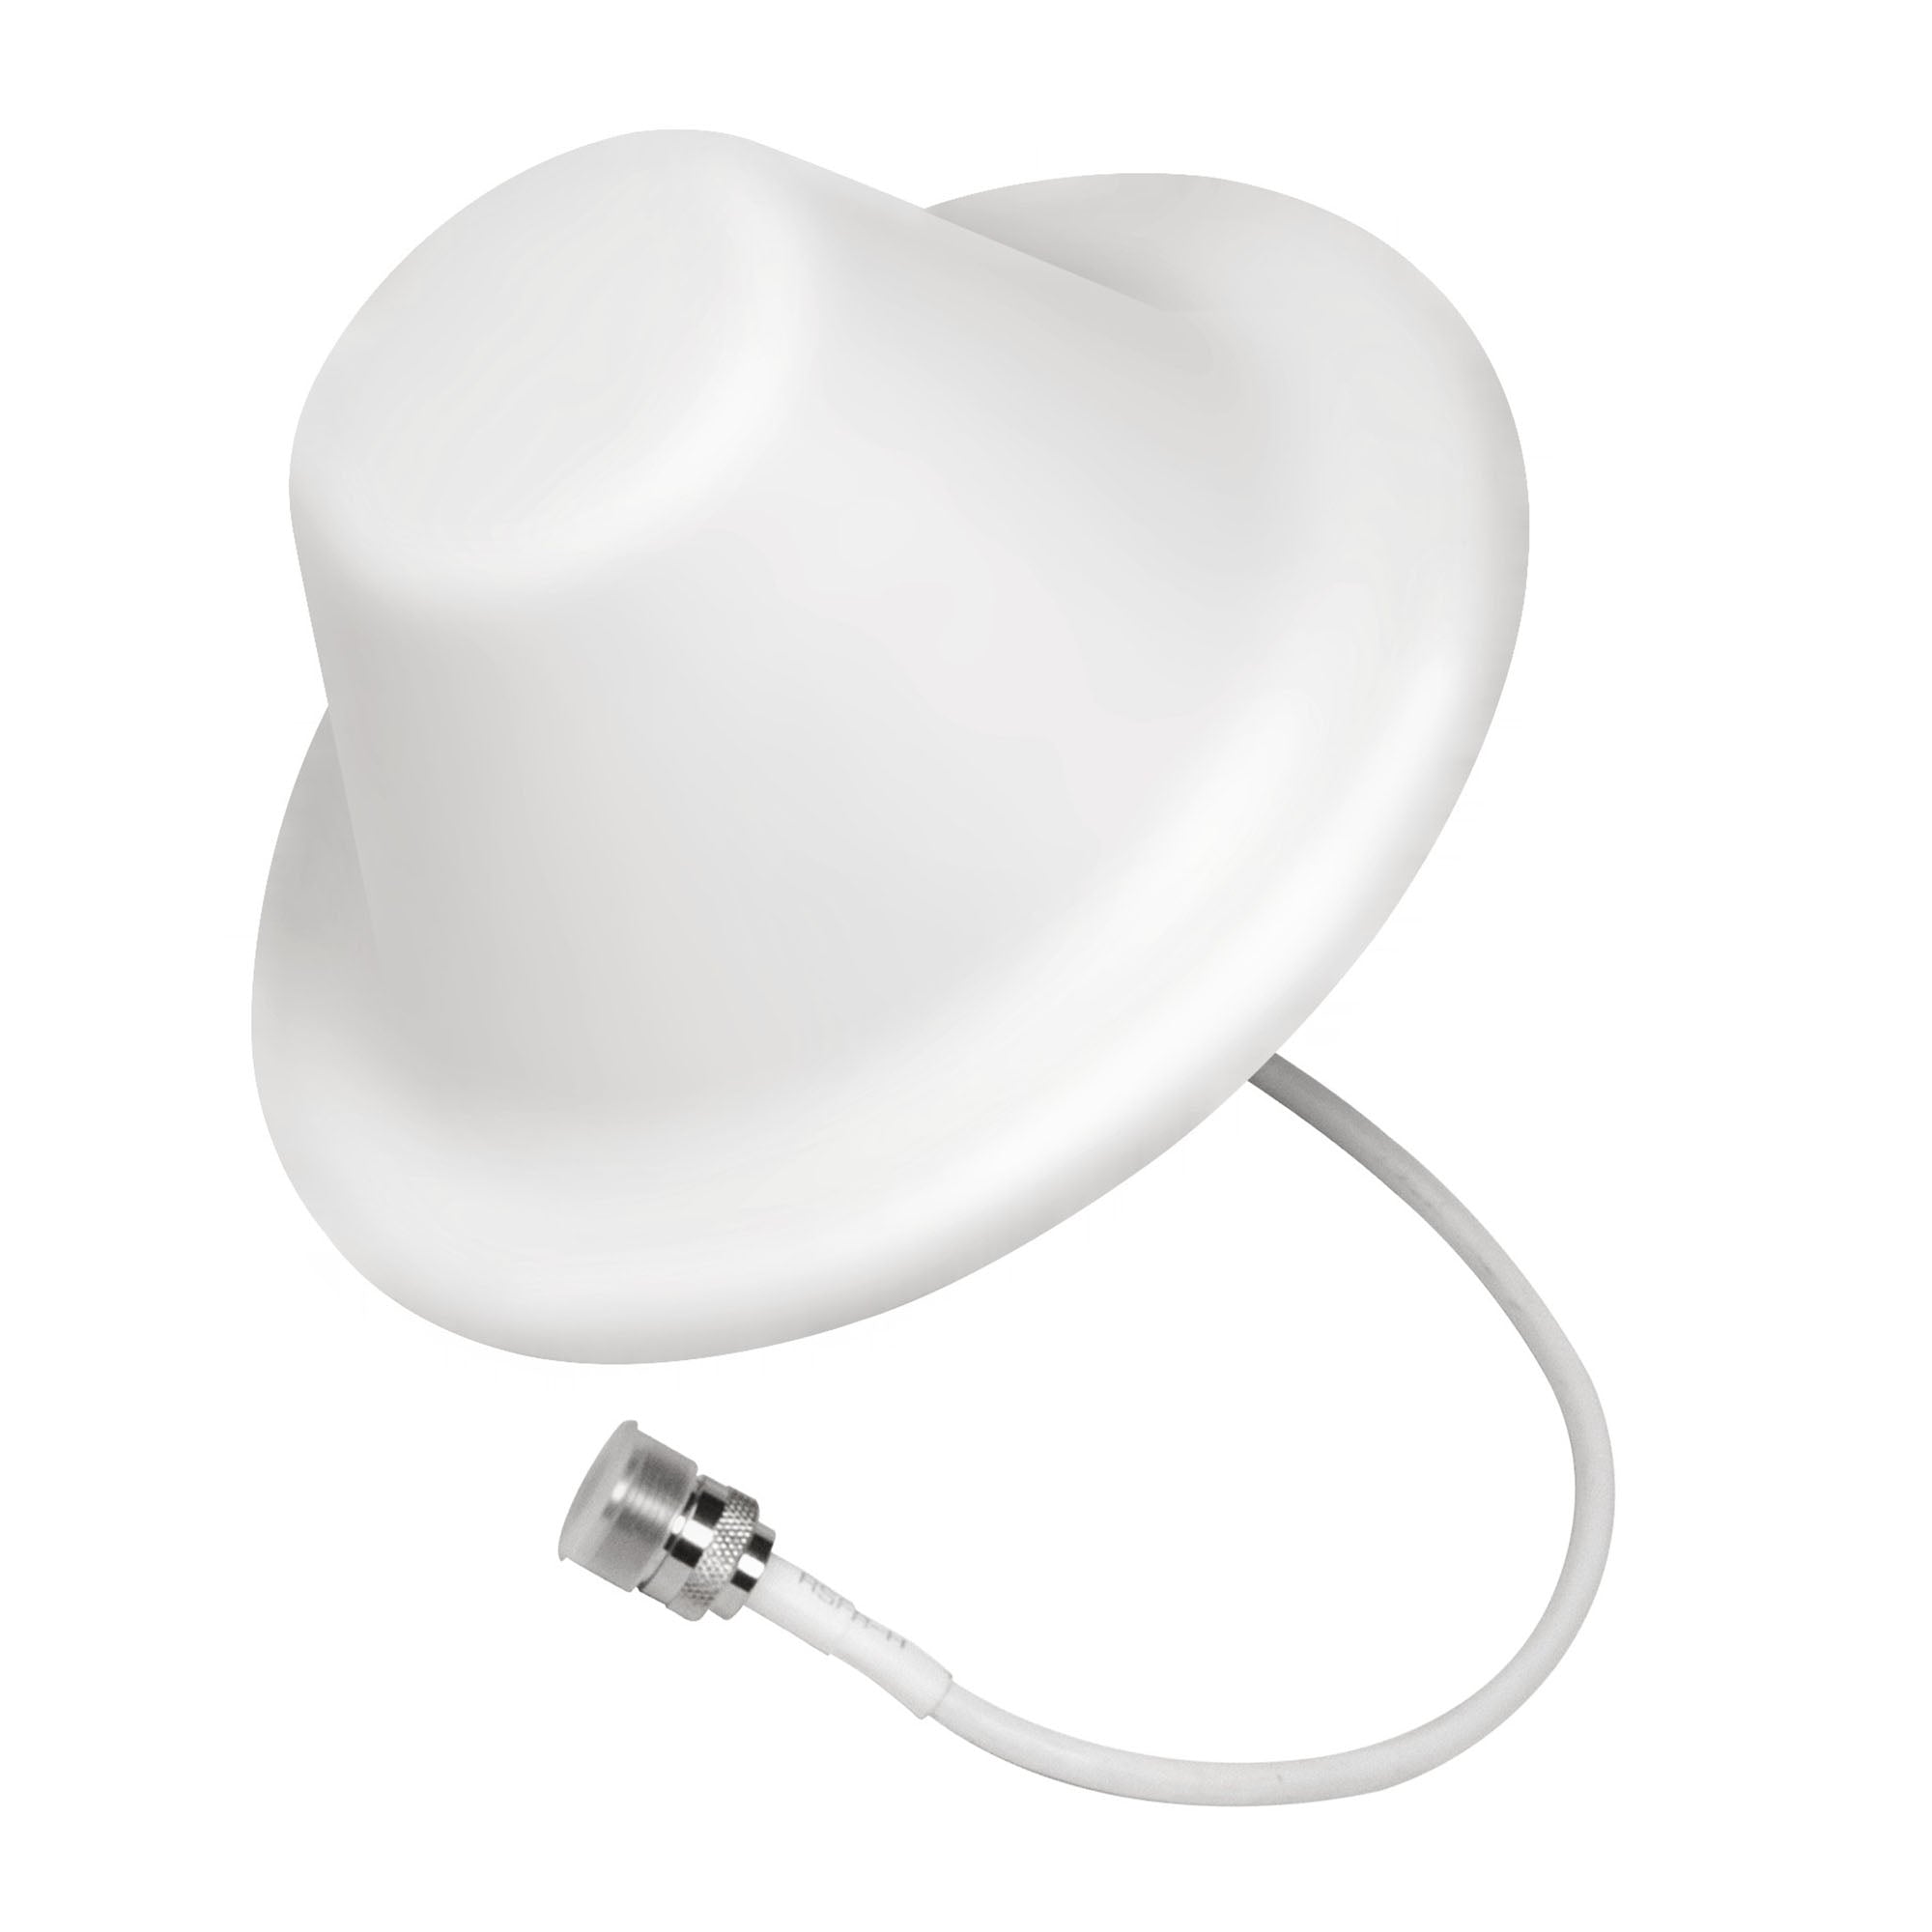 Wilson Dome Antenna 50 ohm w/ 12 in. Pigtail N-Female - 15-01850